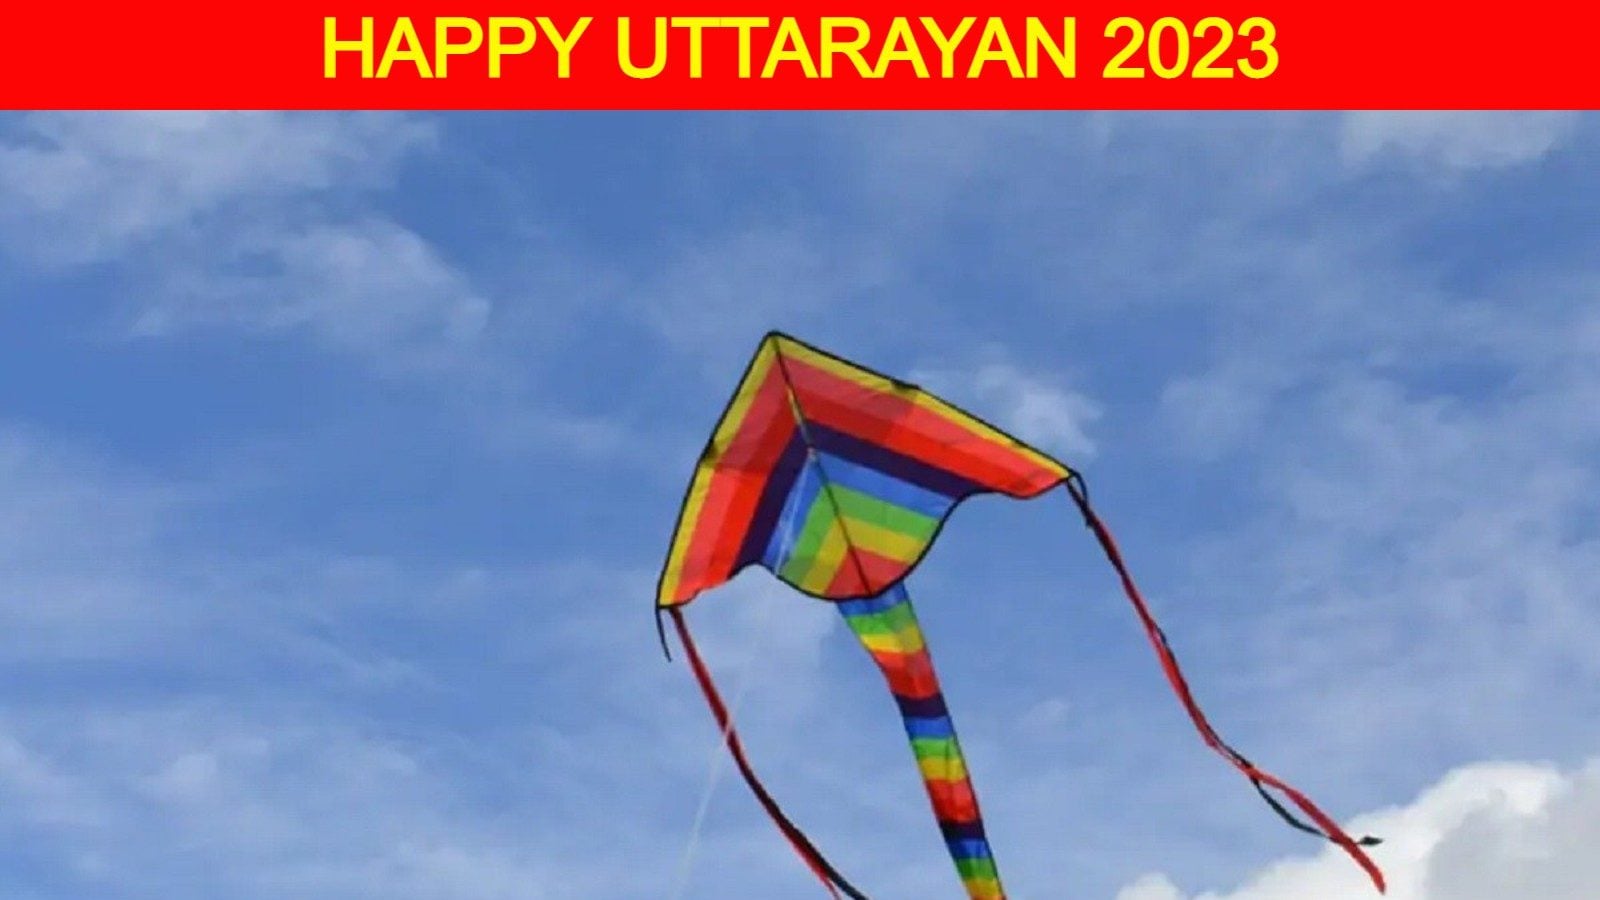 Ultimate Compilation: Over 999 Uttrayan Images in Stunning 4K Resolution